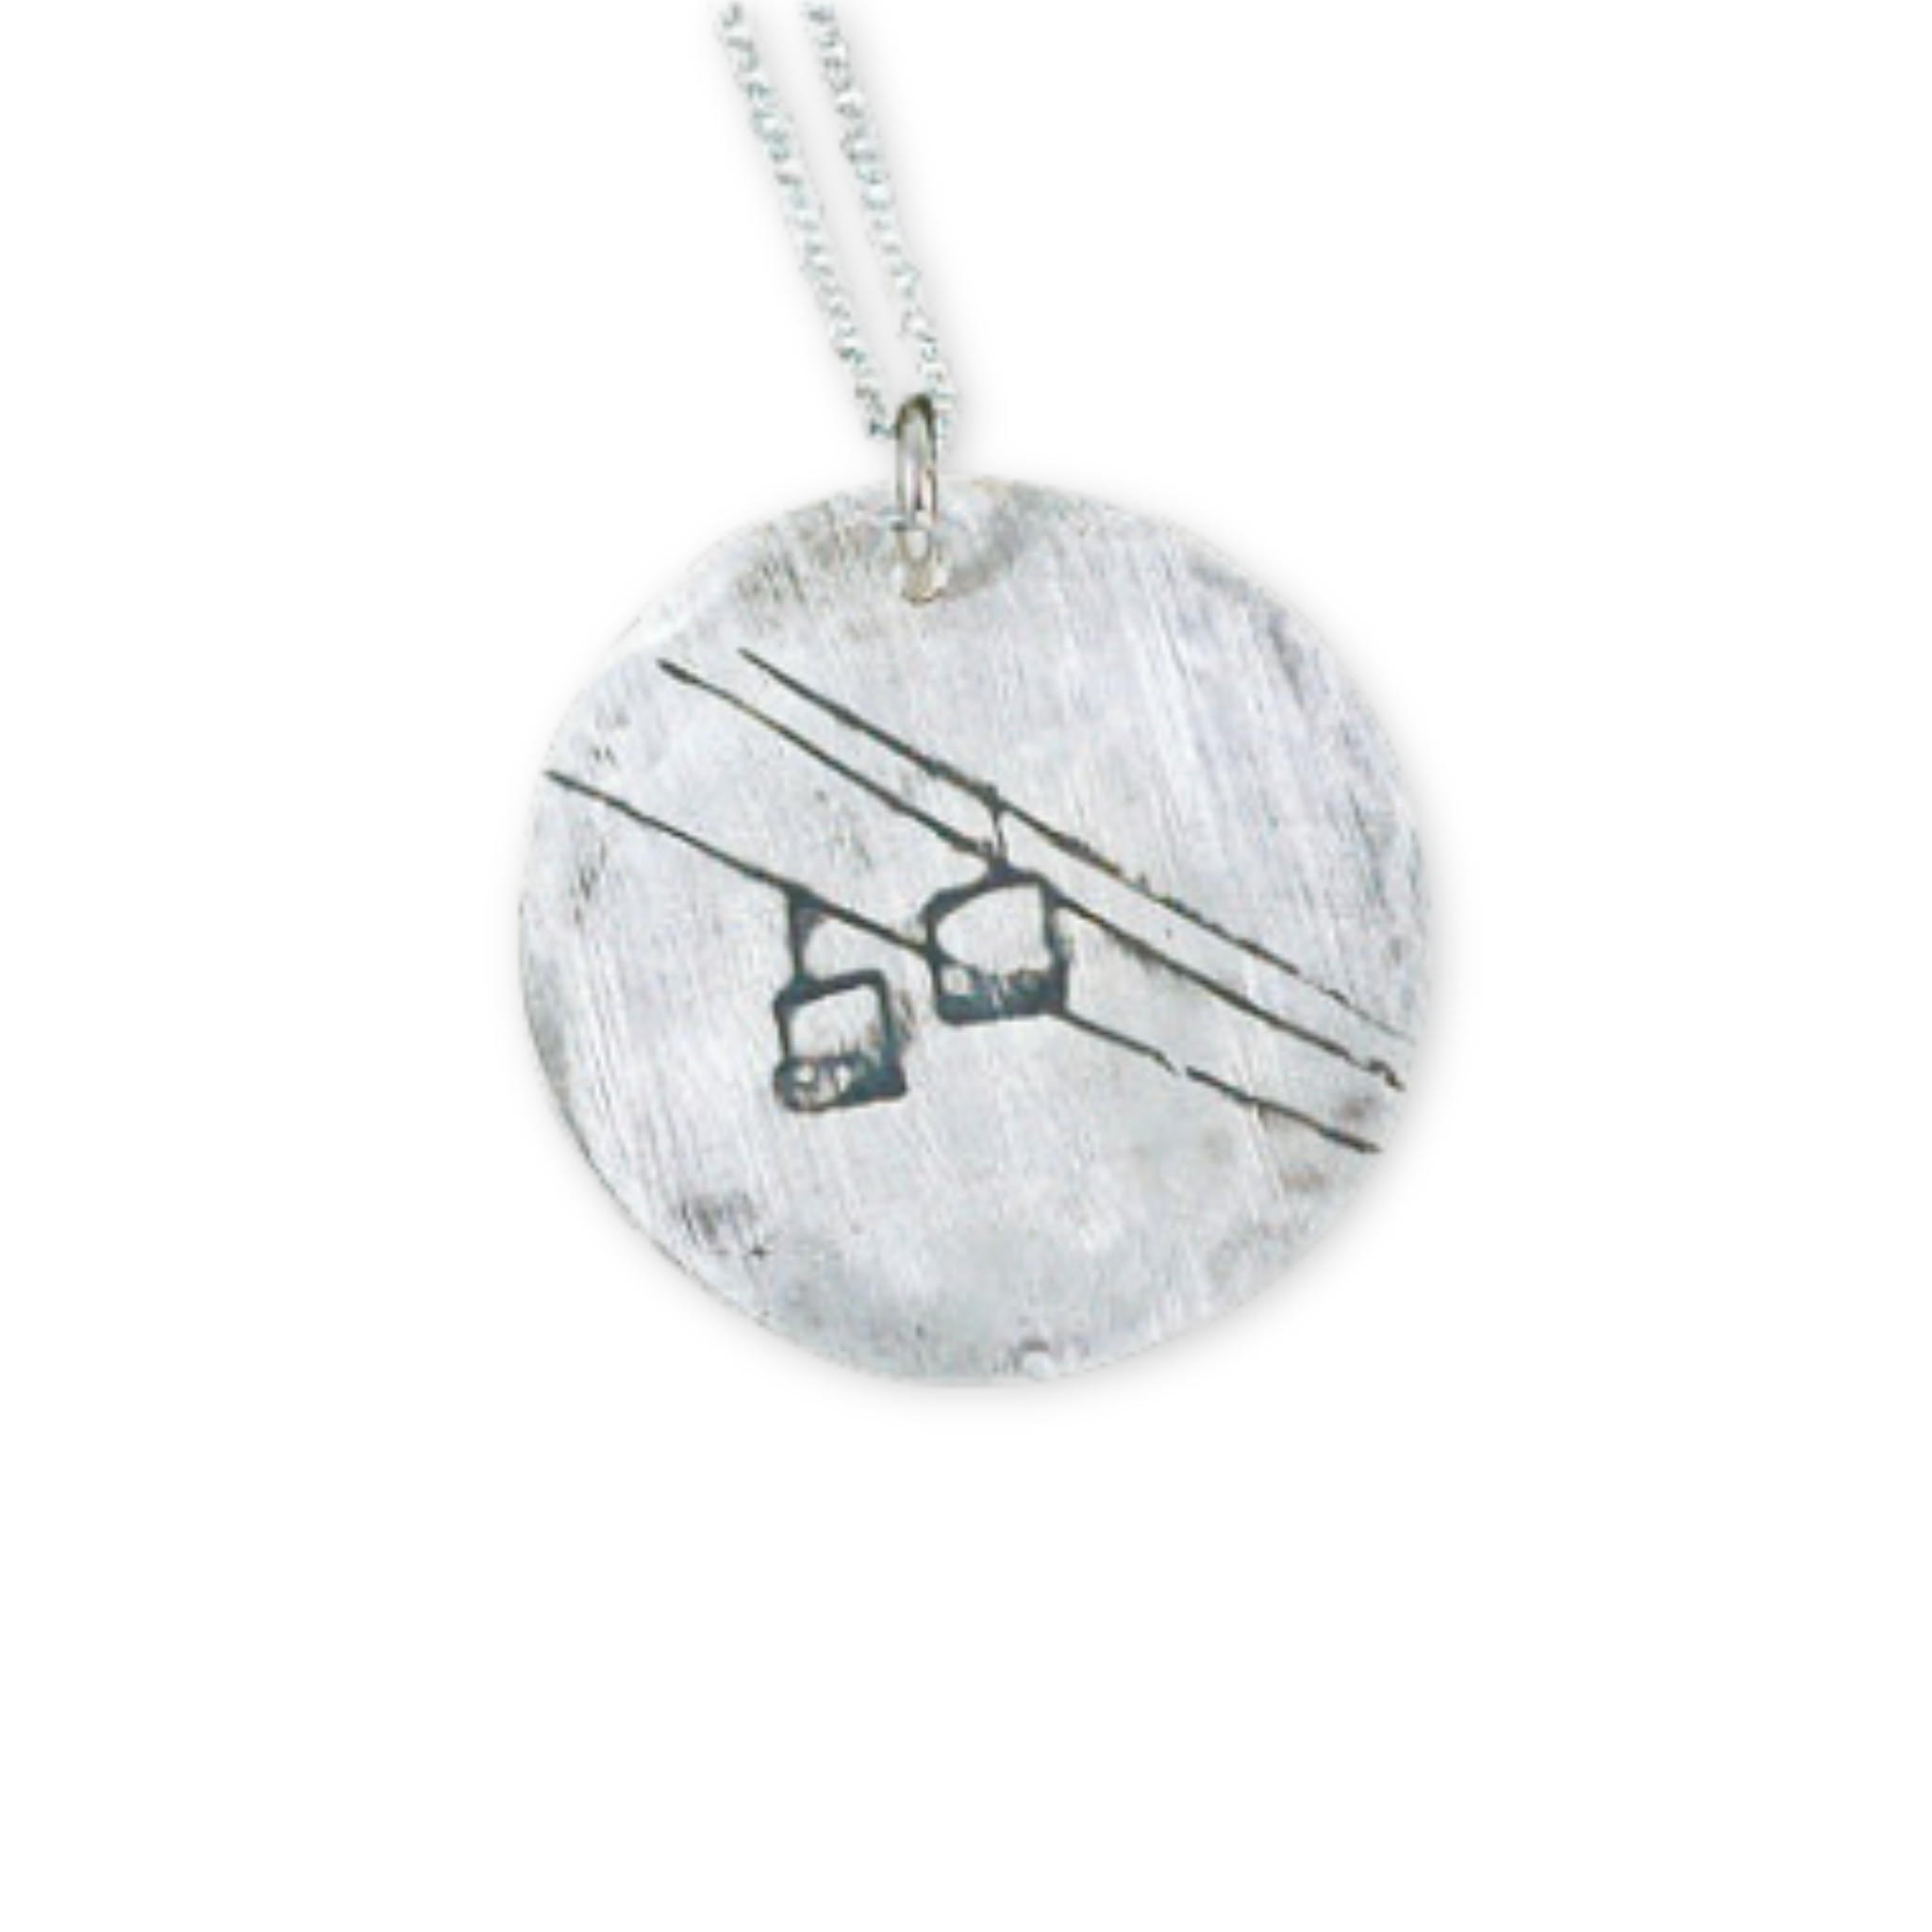 silver pendant with a chairlift design on it